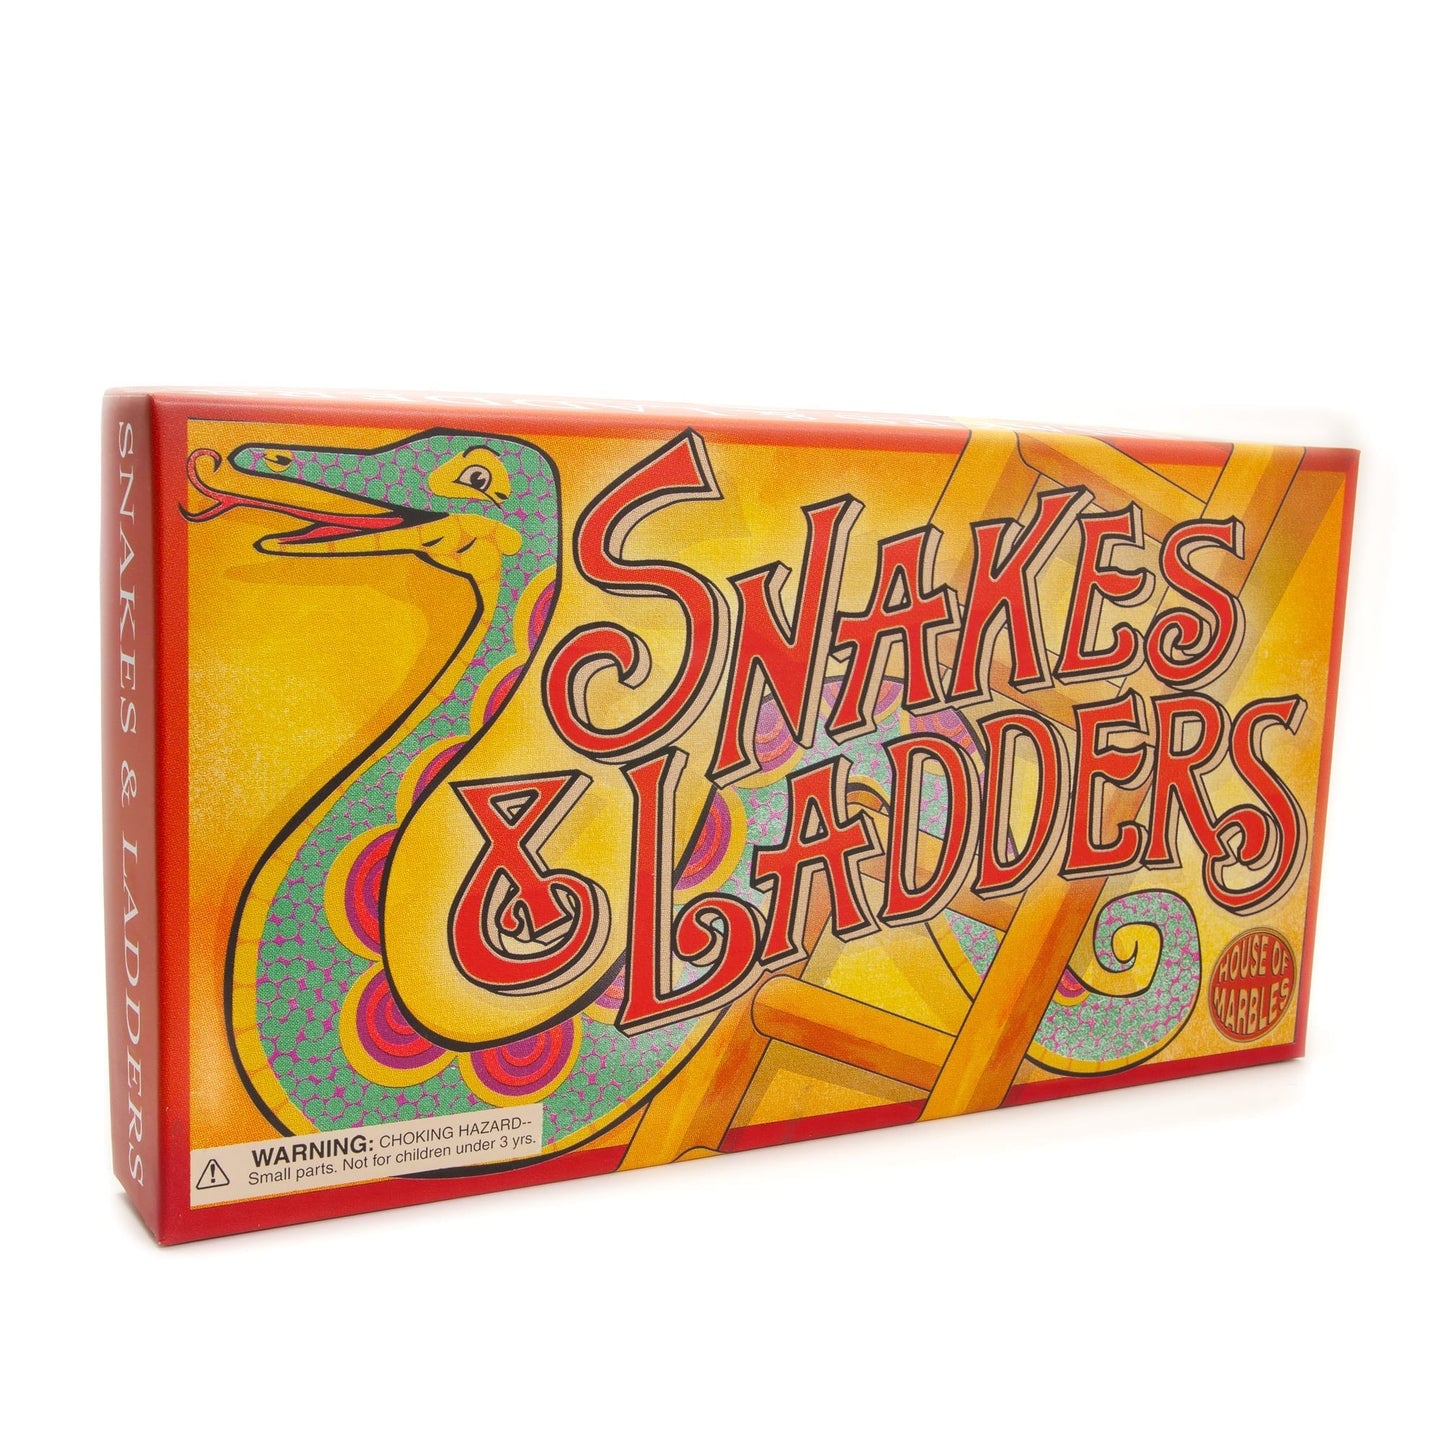 Vintage Snakes and Ladders Game